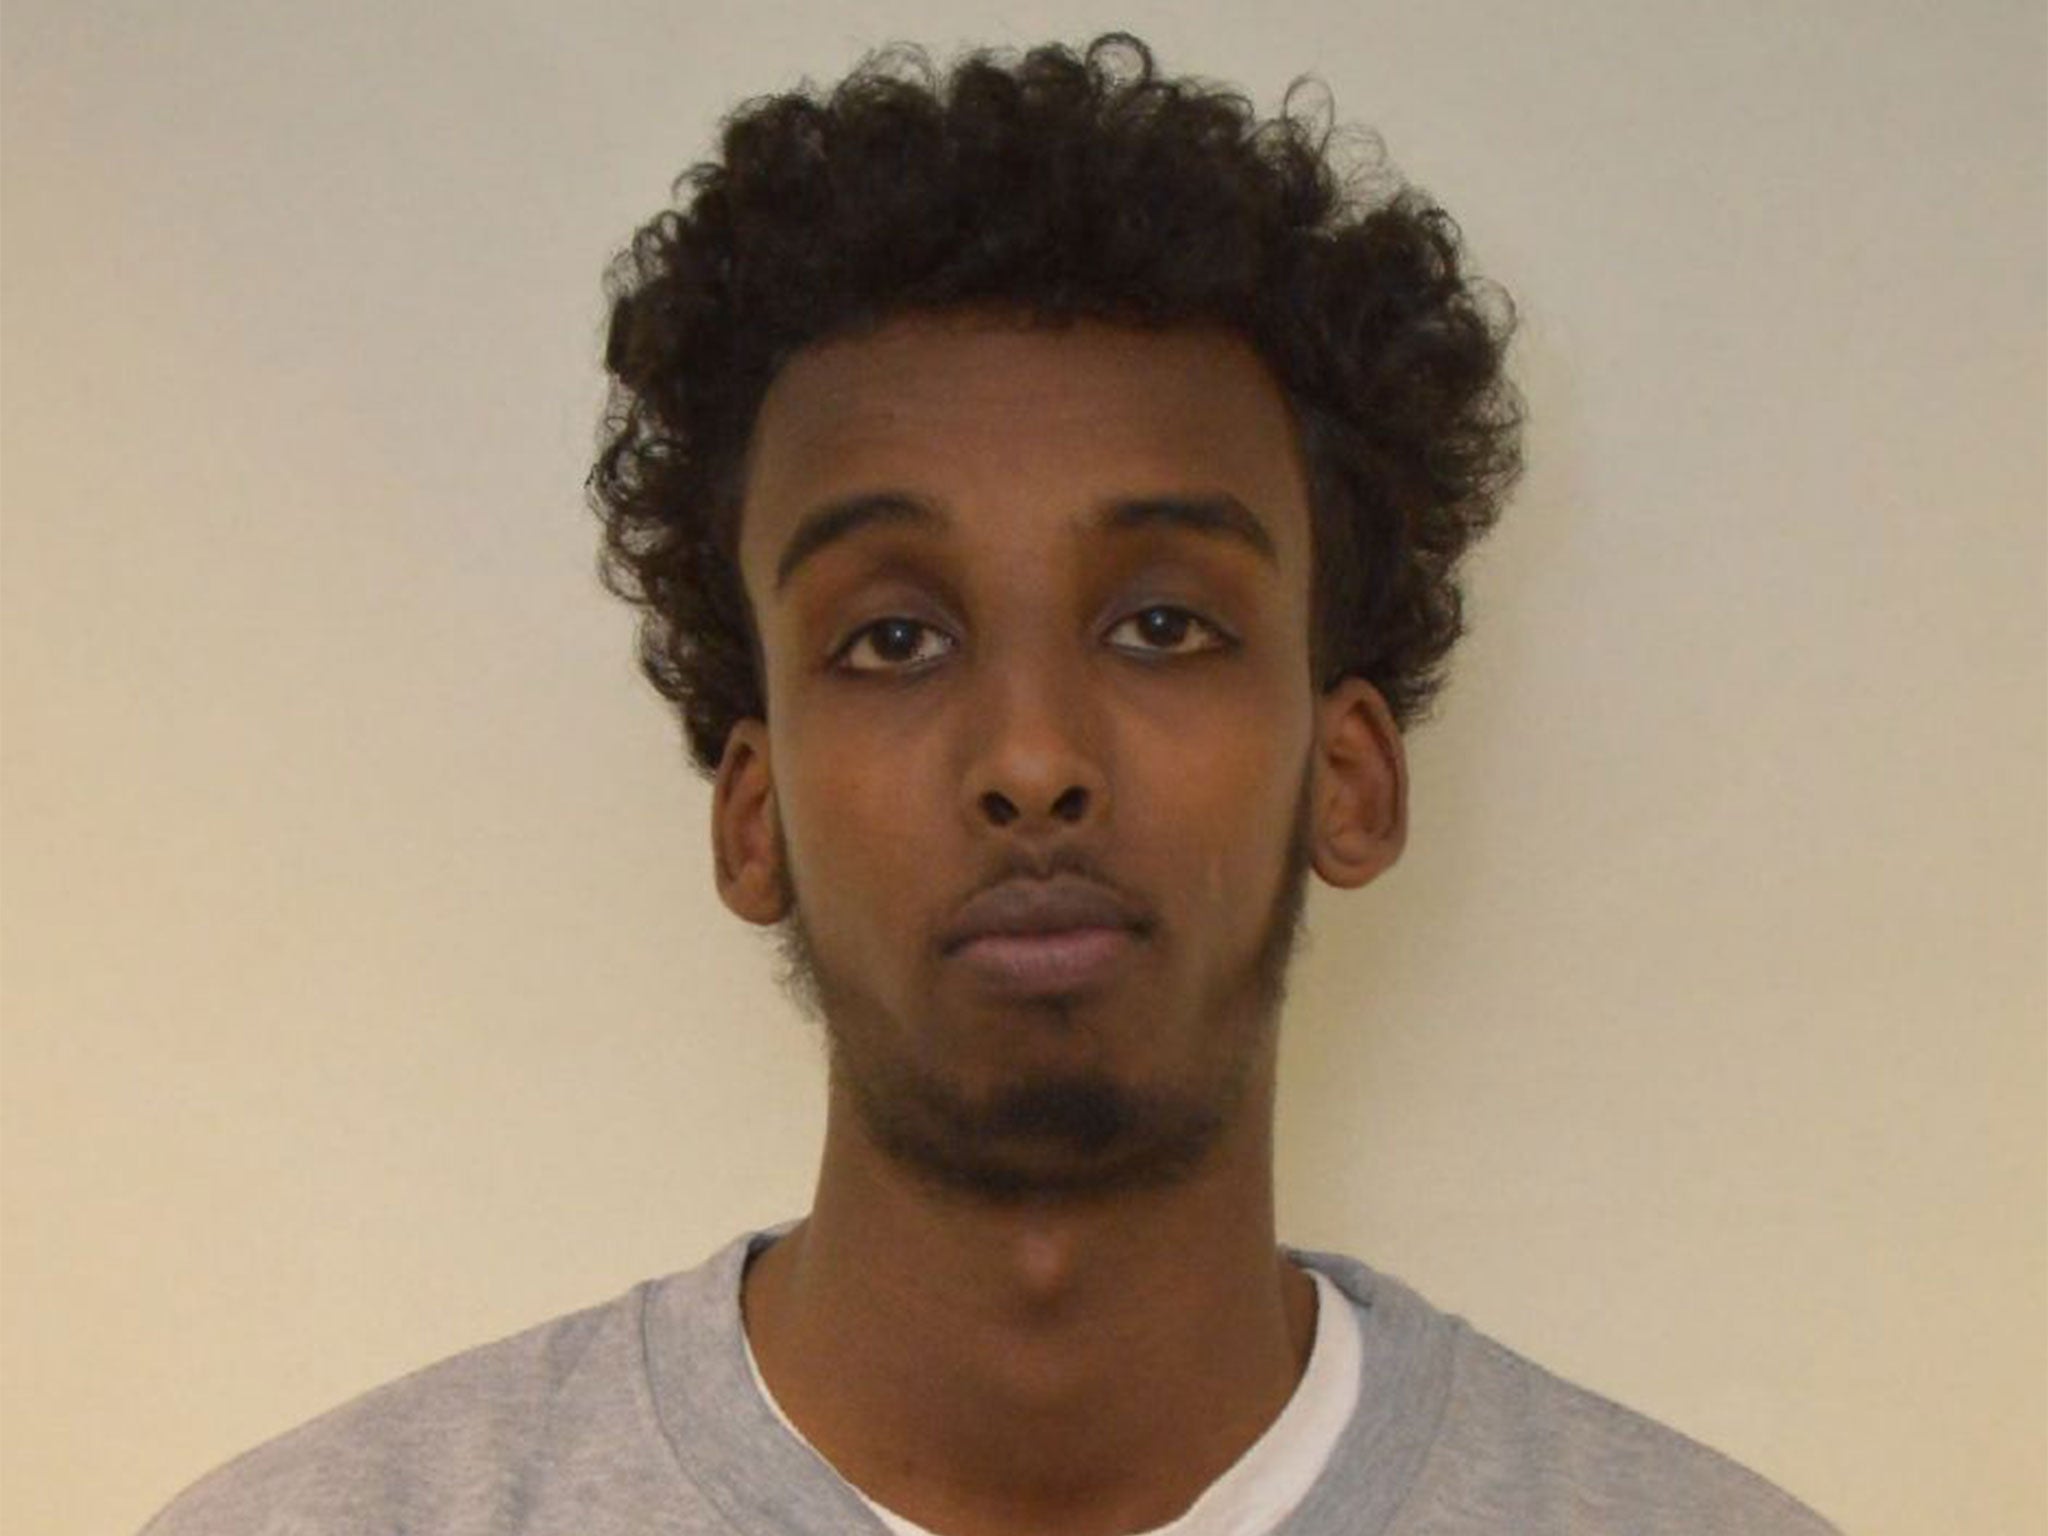 Mohamed Dahir, 23, was found guilty of conspiring to commit fraud